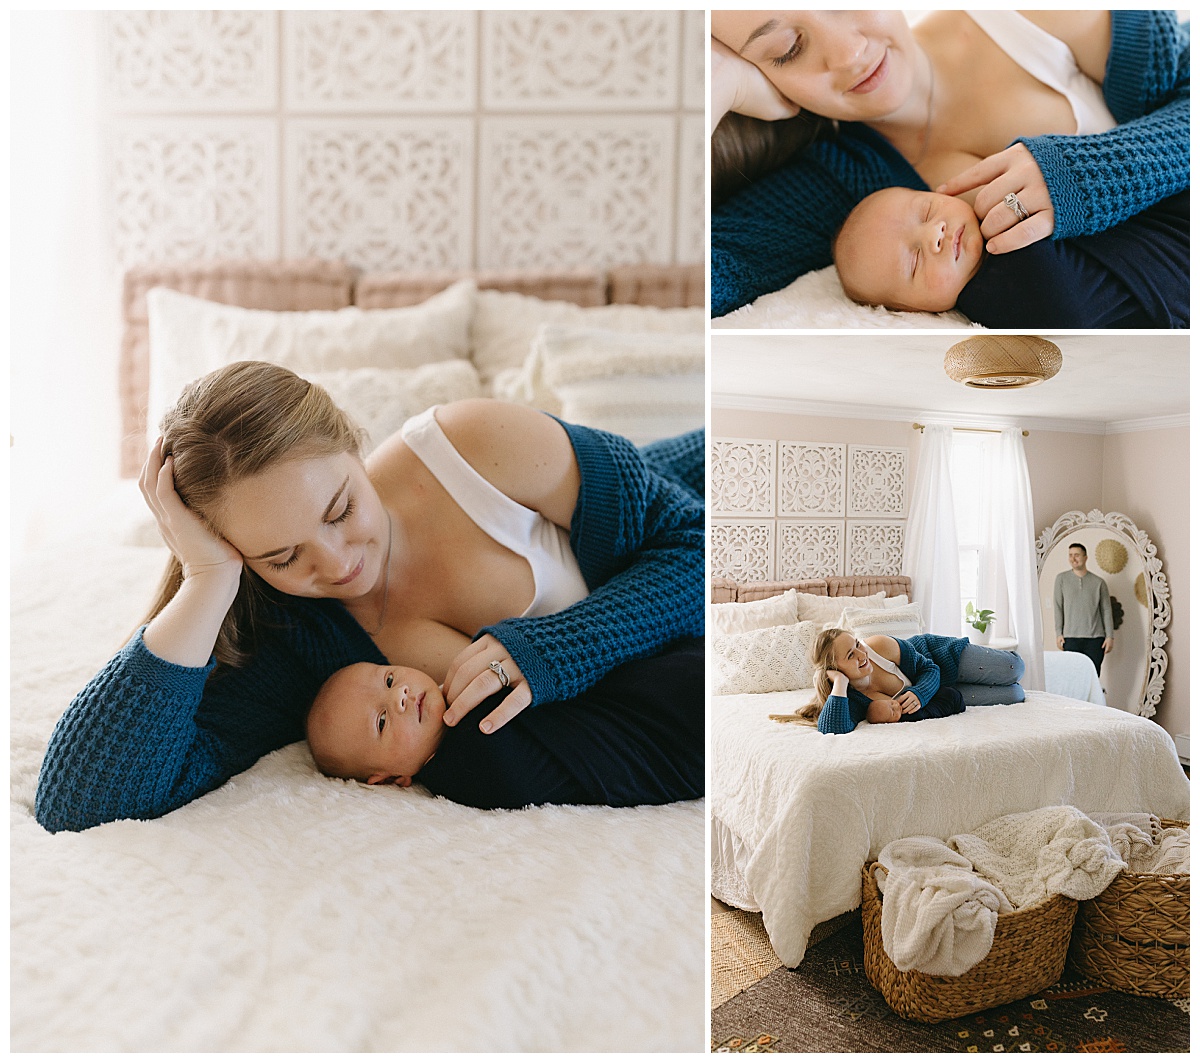 mother lays next to infant on bed by Nikki Meer Photography